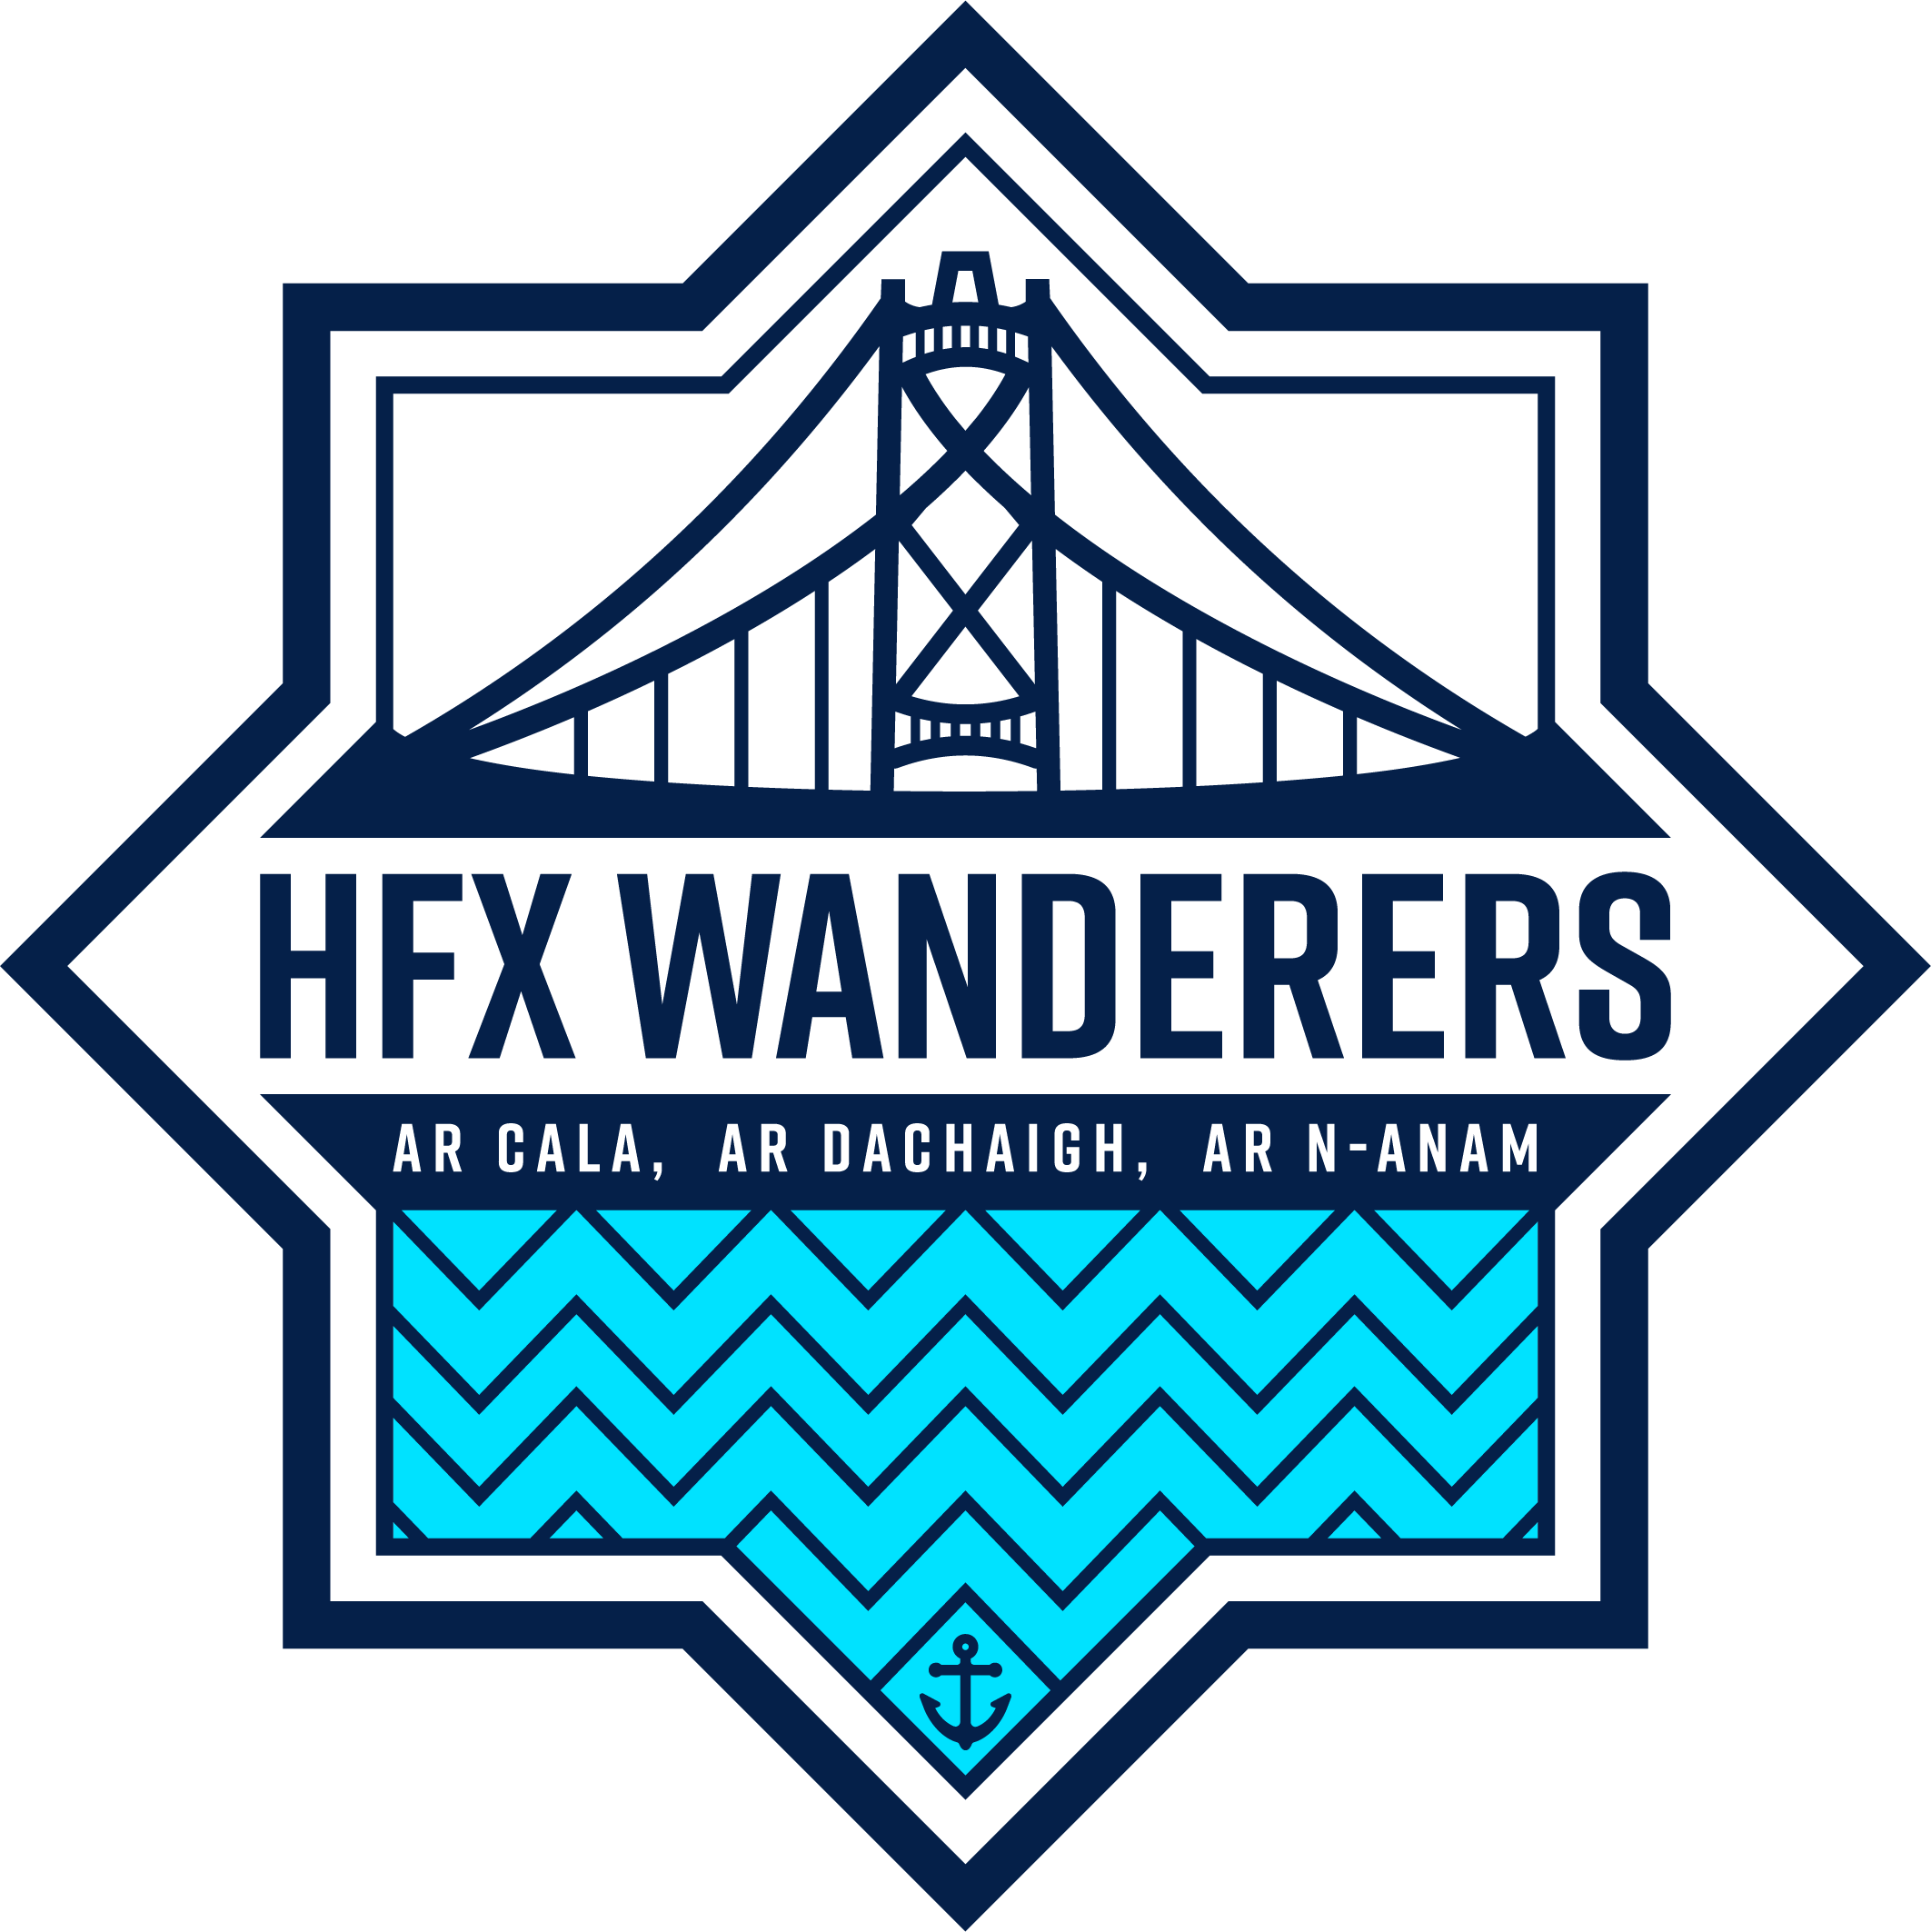 Halifax Logo - Wanderers club crest scores win in CPL logo contest – HFX Wanderers FC